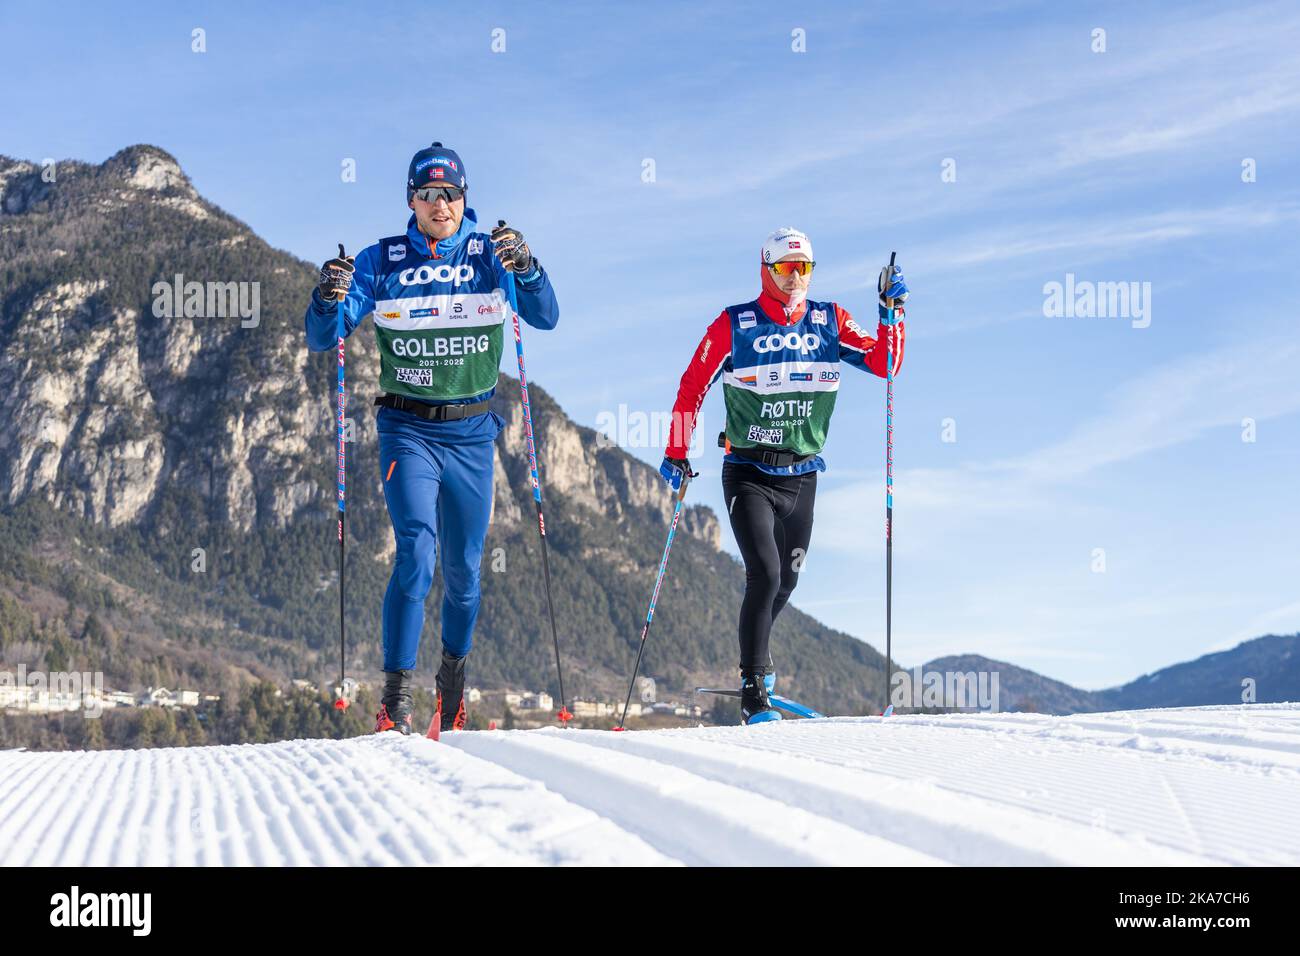 Lake Tesero, Italy 20220102. Paal Golberg (left) and Sjur Roethe during training in Val di Fiemme before the last two stages of the Tour de Ski. Photo: Terje Pedersen / NTB  Stock Photo